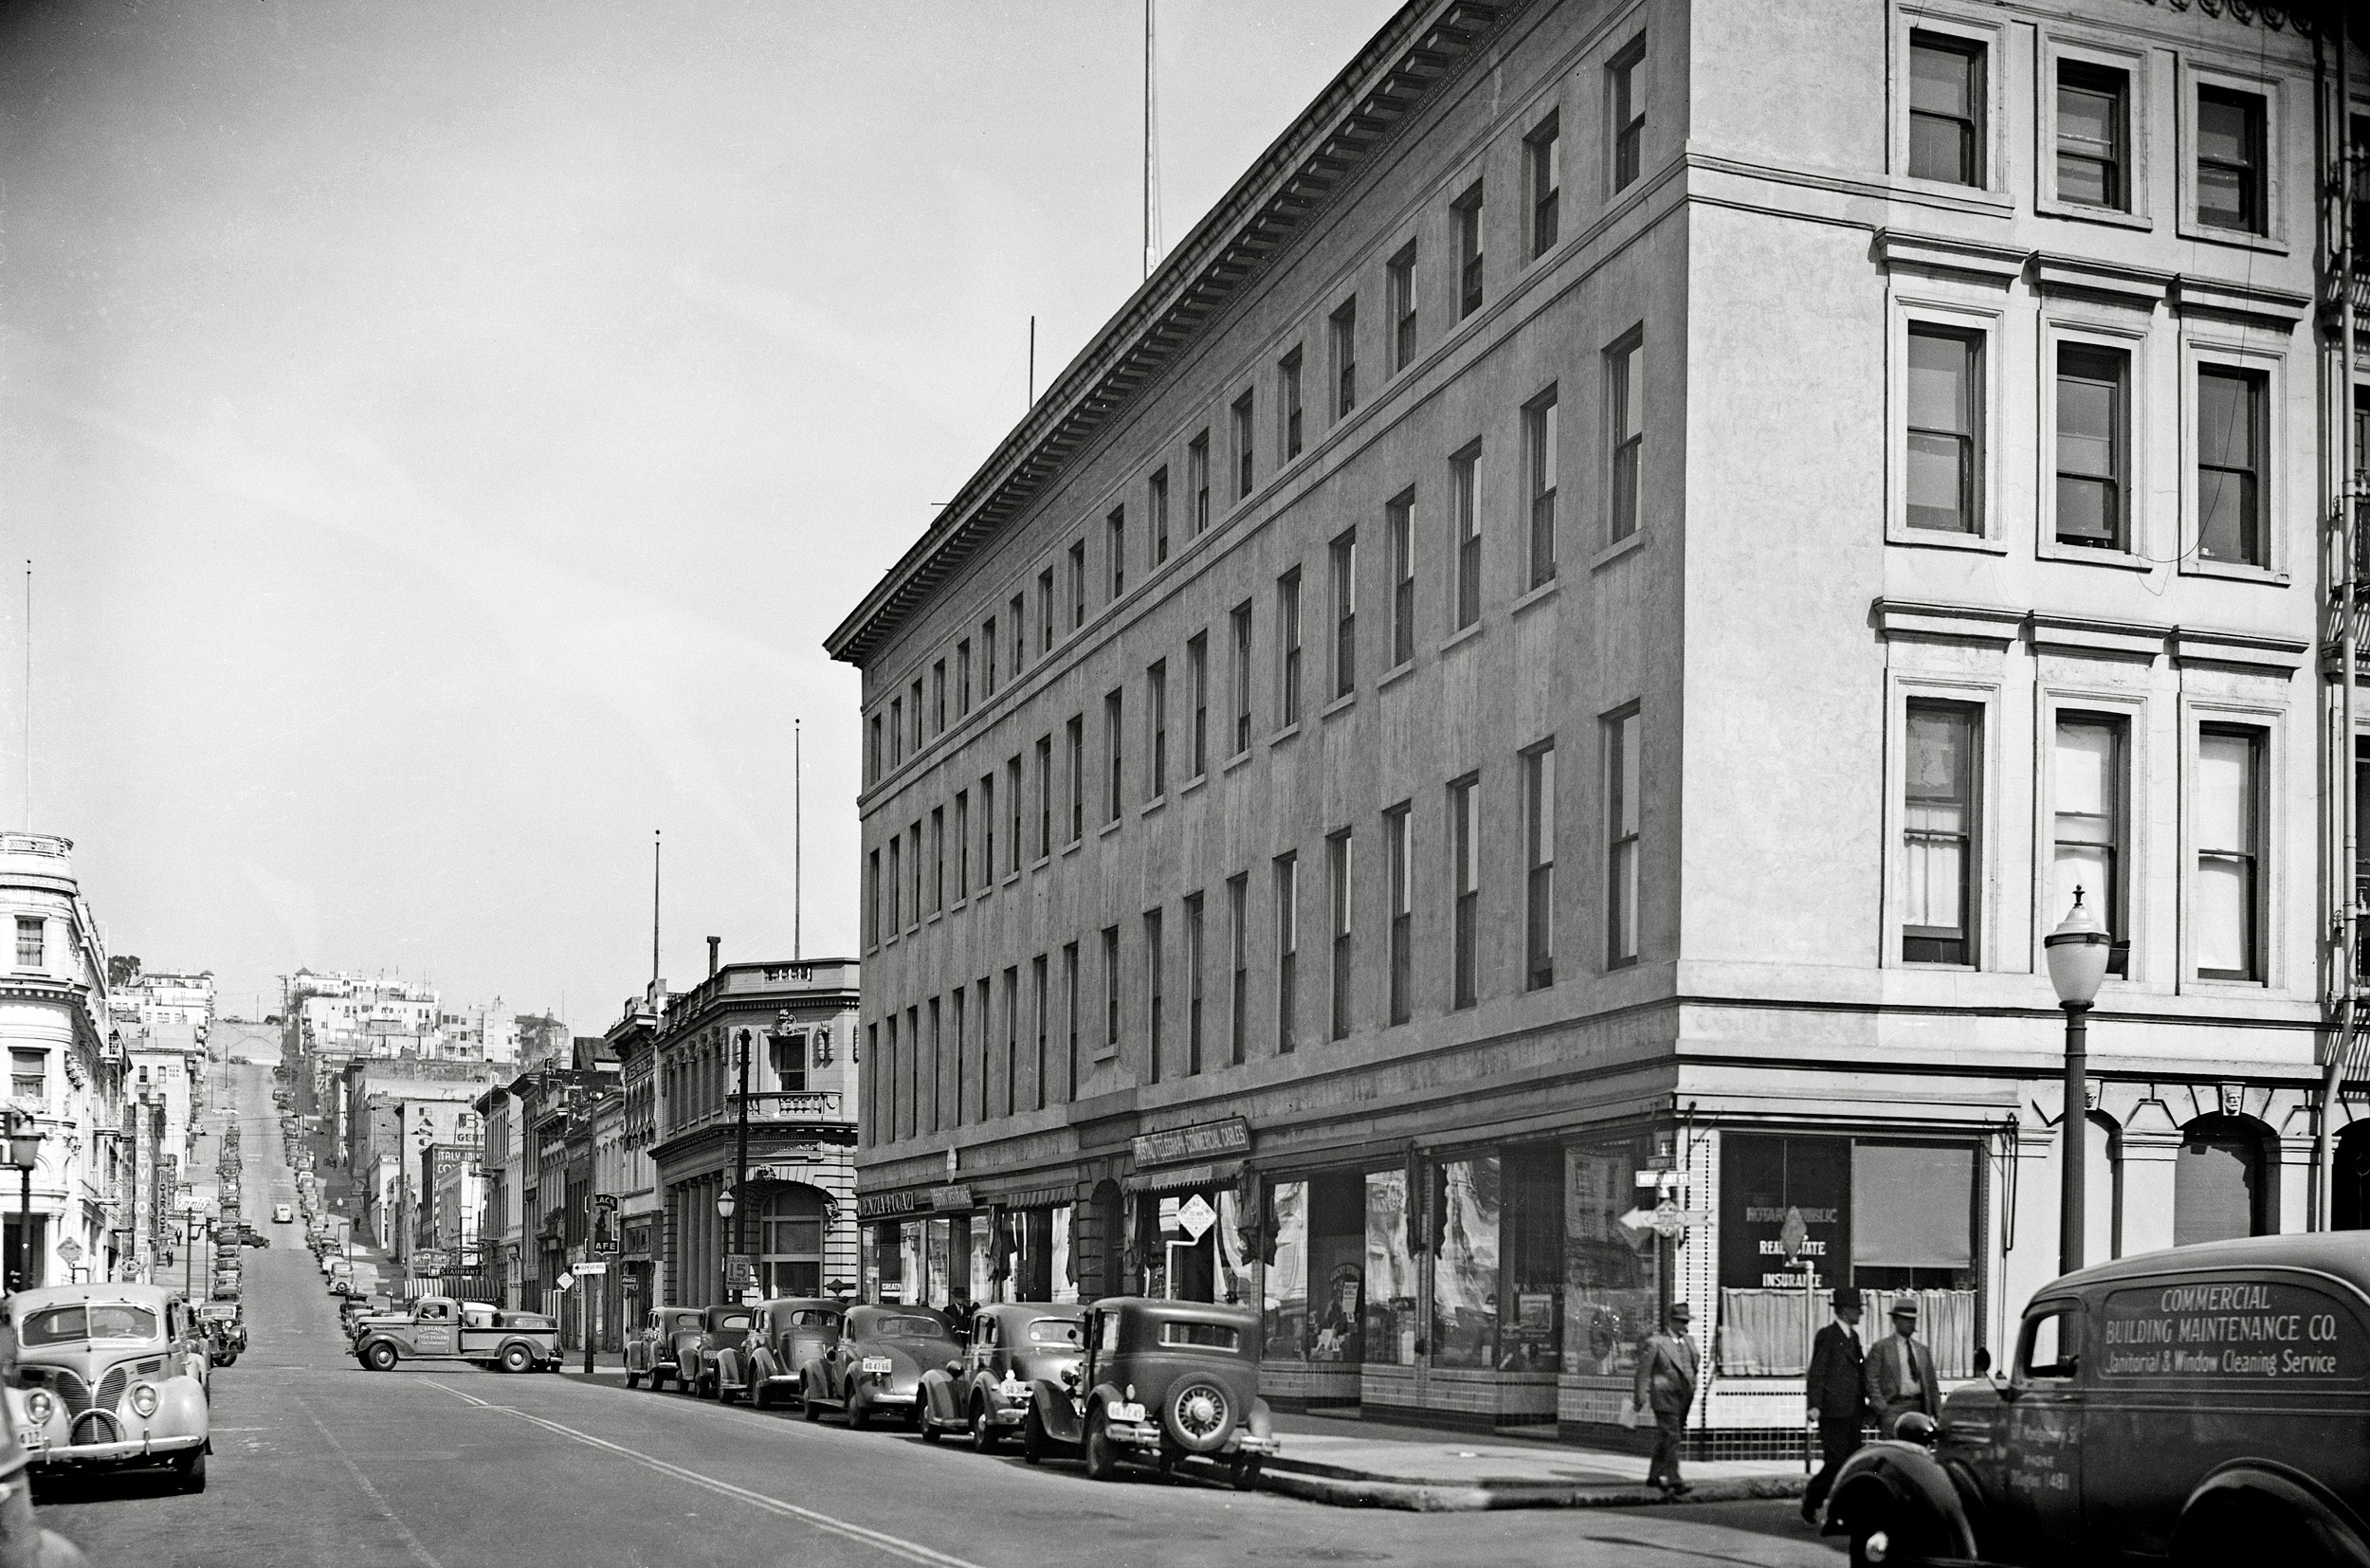 San Francisco March 1940. "Built as the largest and safest office building in San Francisco, the Montgomery Block became the headquarters of professional men from 1853 to 1890. It was the only major downtown San Francisco building to escape the earthquake and fire of 1906." Previously seen here, its site became a parking lot in 1959, and is now part of the footprint of the Transamerica Pyramid. Large format negative by A.J. Whitlock for the Historic American Buildings Survey. View full size.